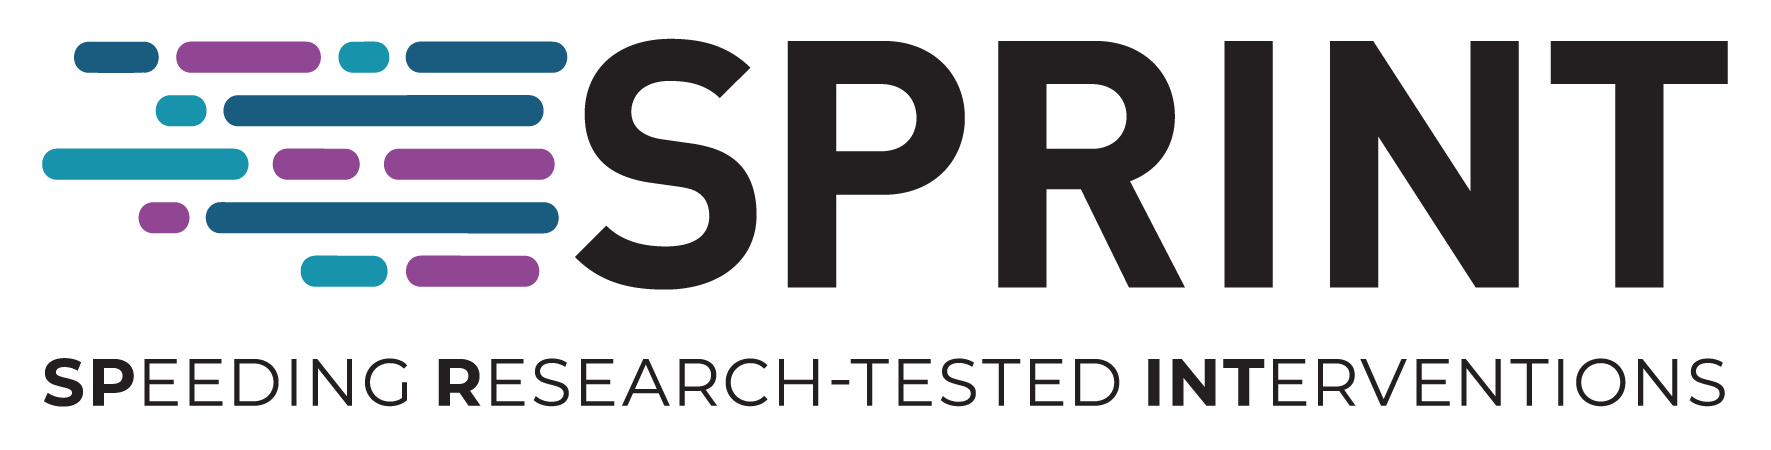 SPeeding Research-tested INTerventions (SPRINT)